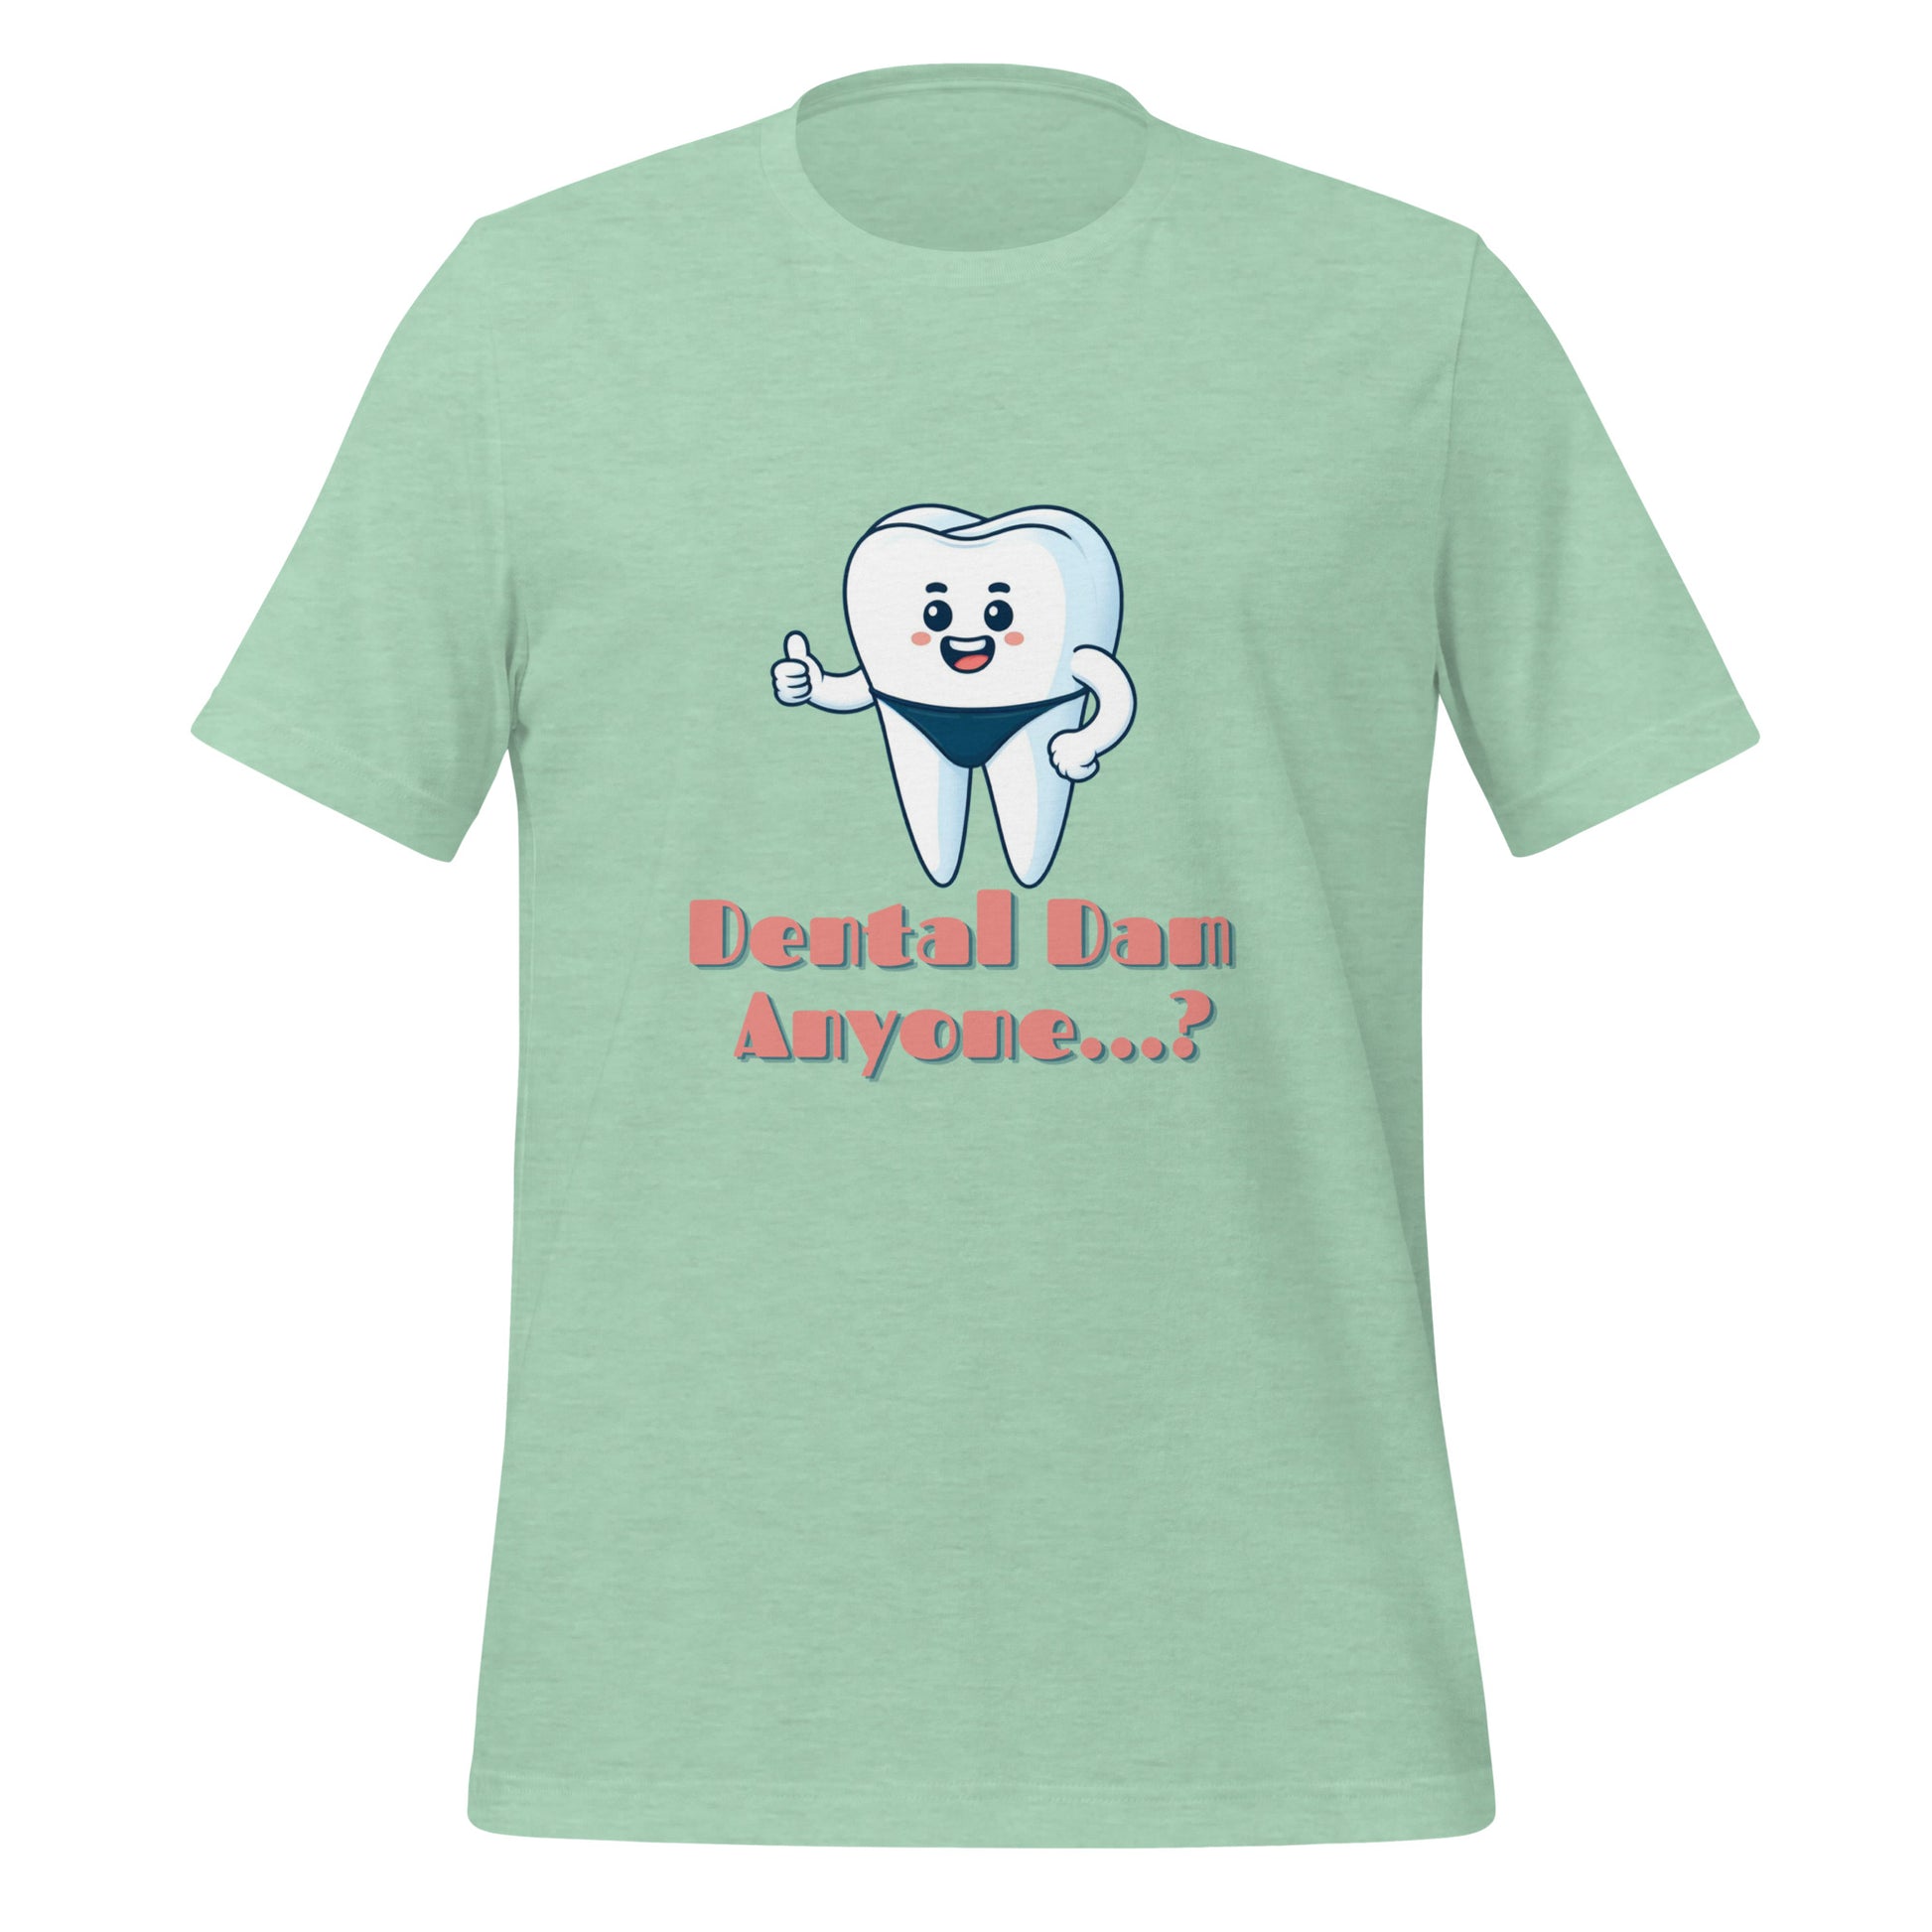 Funny dental shirt featuring a playful tooth character in a speedo with the text ‘Dental Dam Anyone?’, perfect for dentists, dental hygienists, and dental students who enjoy dental humor. This dental shirt is a unique addition to any dental professional’s wardrobe, making it an ideal dental office shirt. Don’t miss out on our dental assistant shirts and dental hygiene shirts. Heather prism mint color.